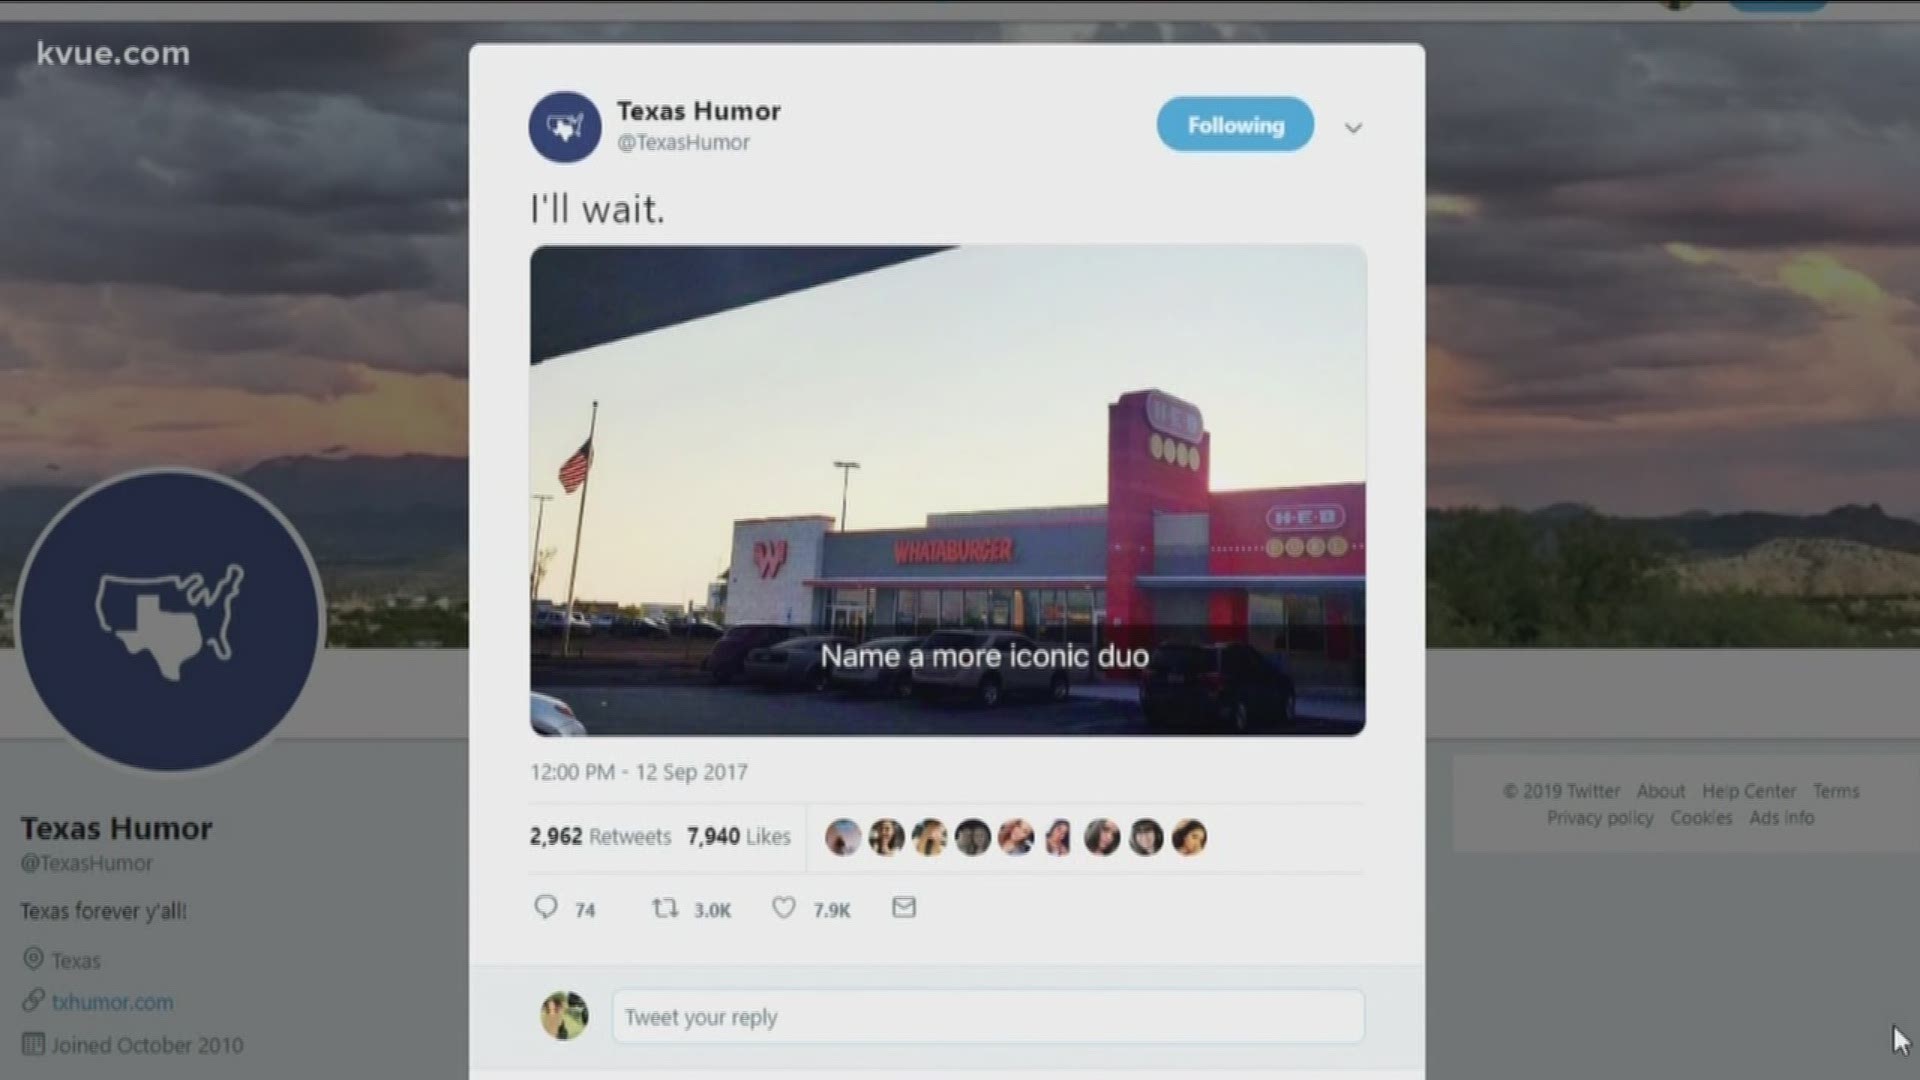 The people behind the "Texas Humor" social media accounts are celebrating Texas Independence Day a little early.